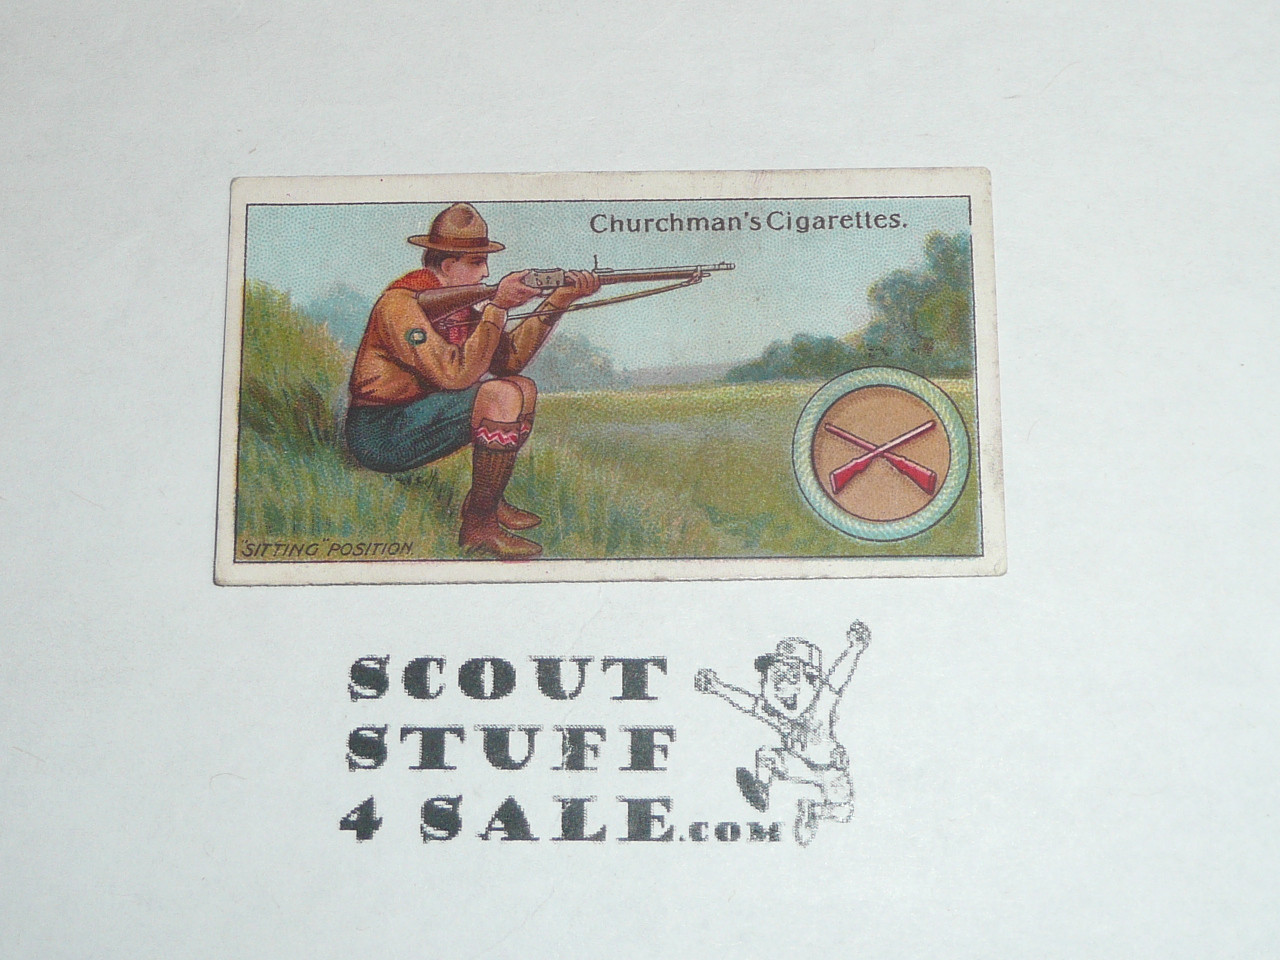 Churchman Cigarette Company Premium Card, Boy Scout Series of 50, Card #46 Sitting Position, 1916